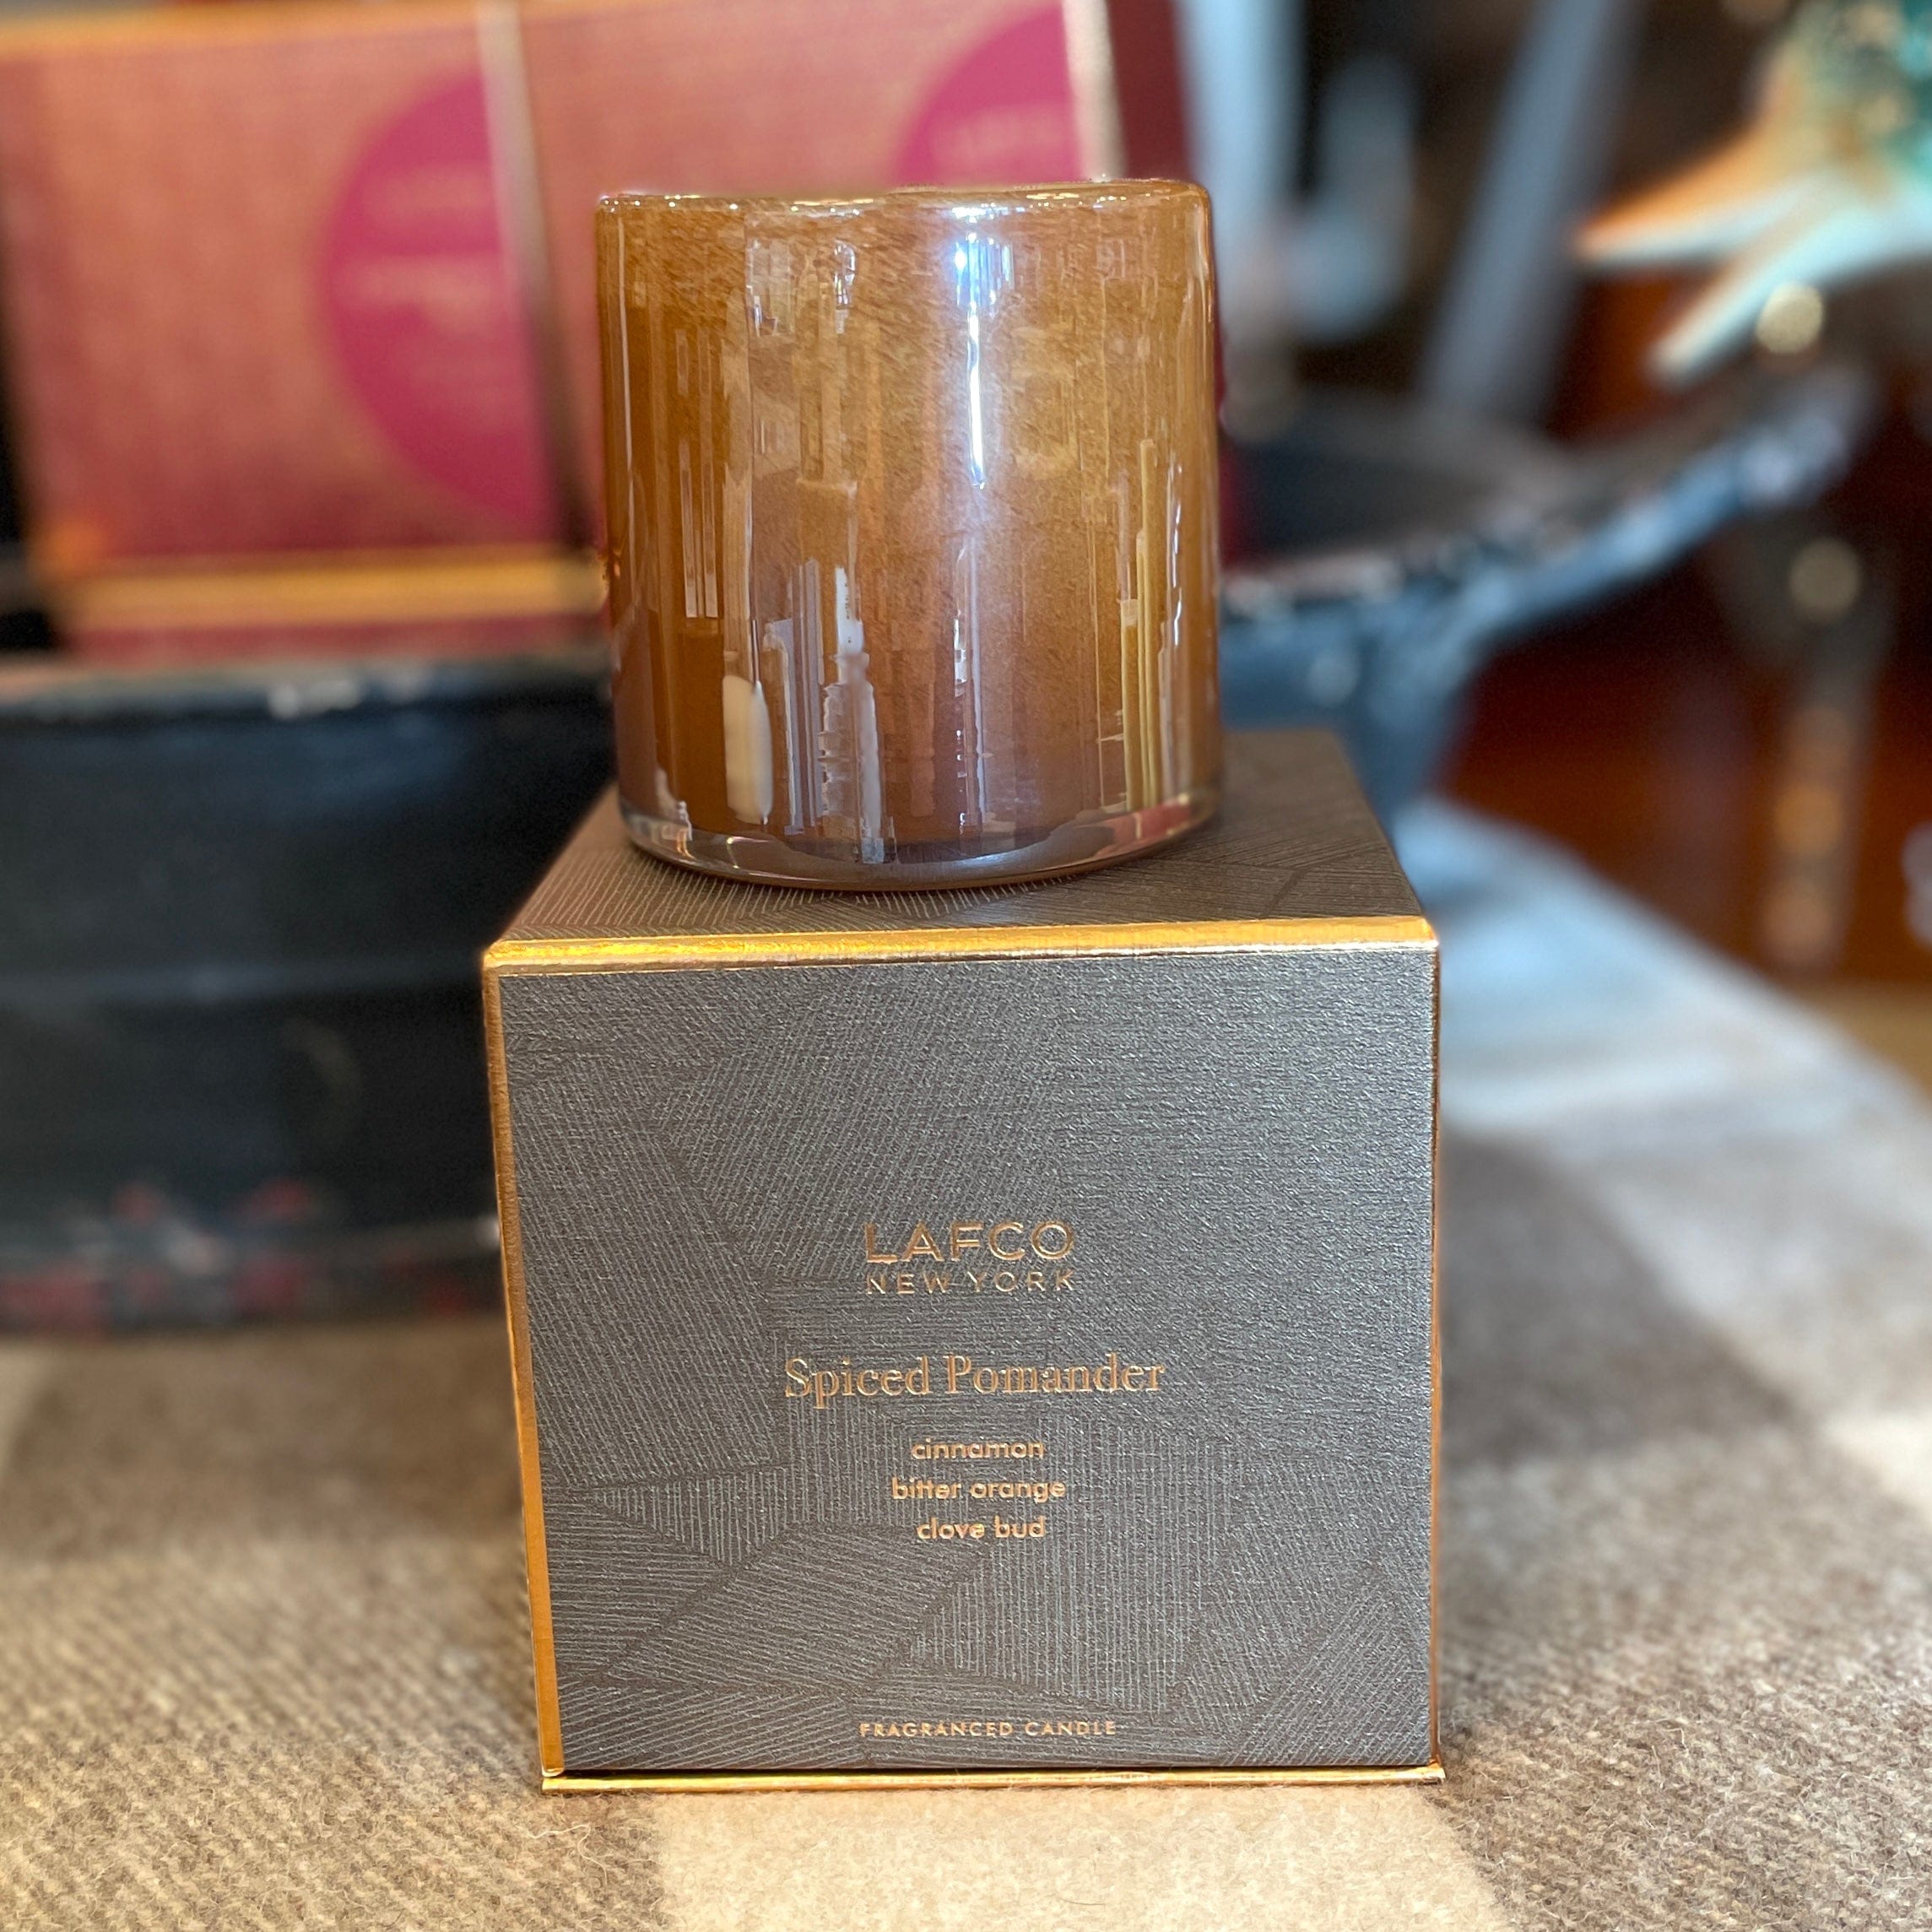 Spiced Pomander LAFCO 6.5oz Limited Edition Candle - PORCH